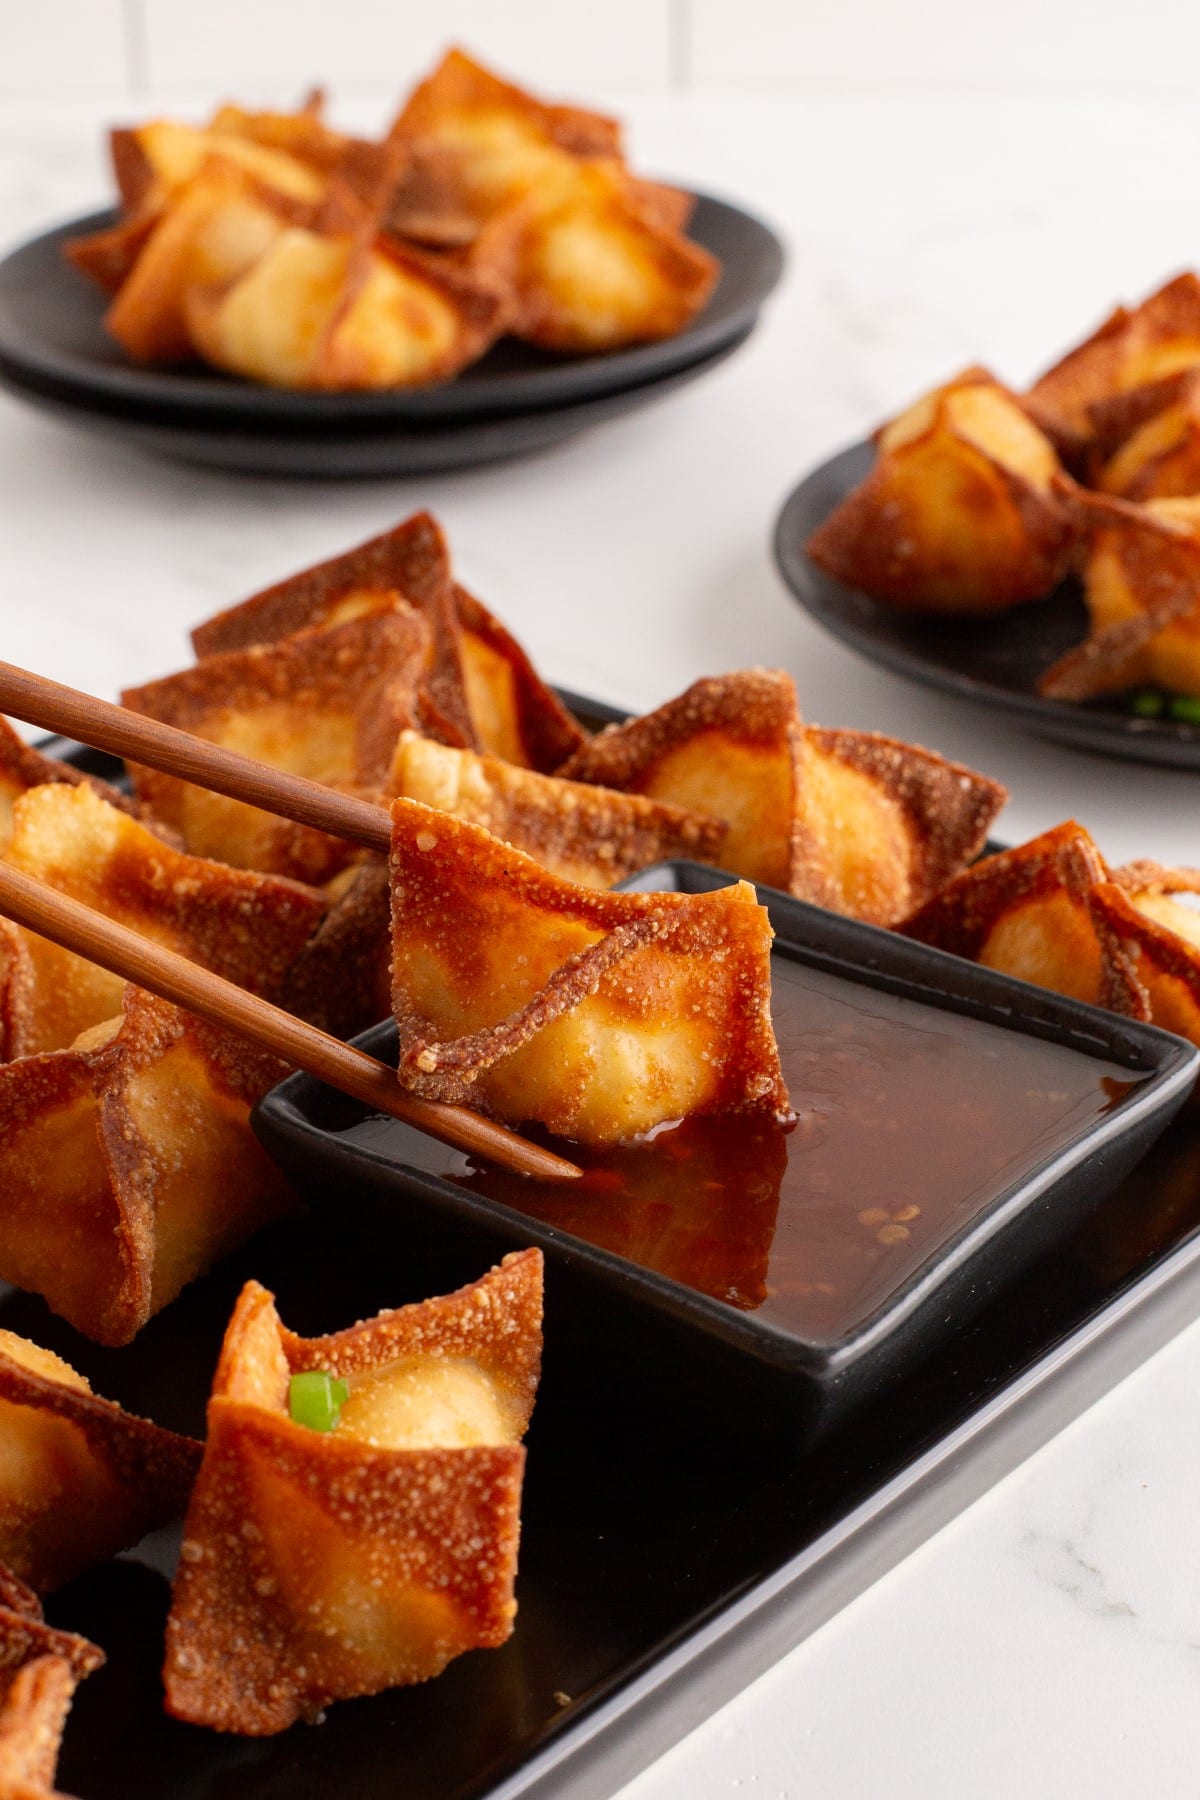 Crab Rangoon on chop sticks being dipped into a dipping sauce.